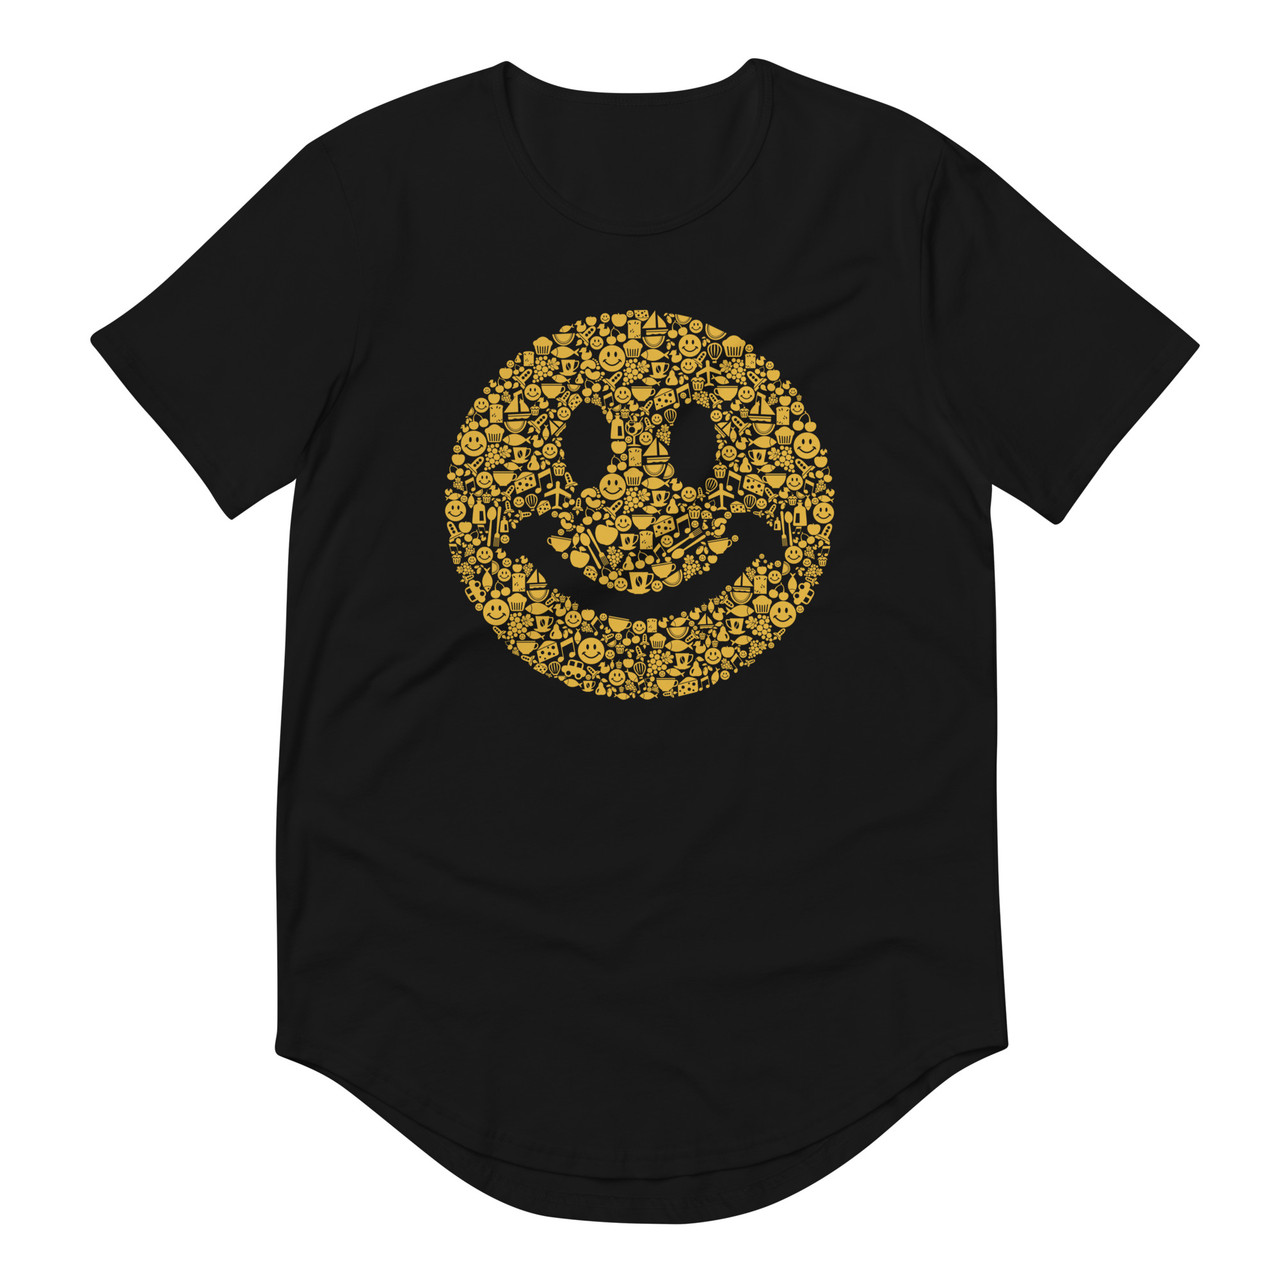 Smile Within A Smile Curved Hem Tee - Bella + Canvas 3003 